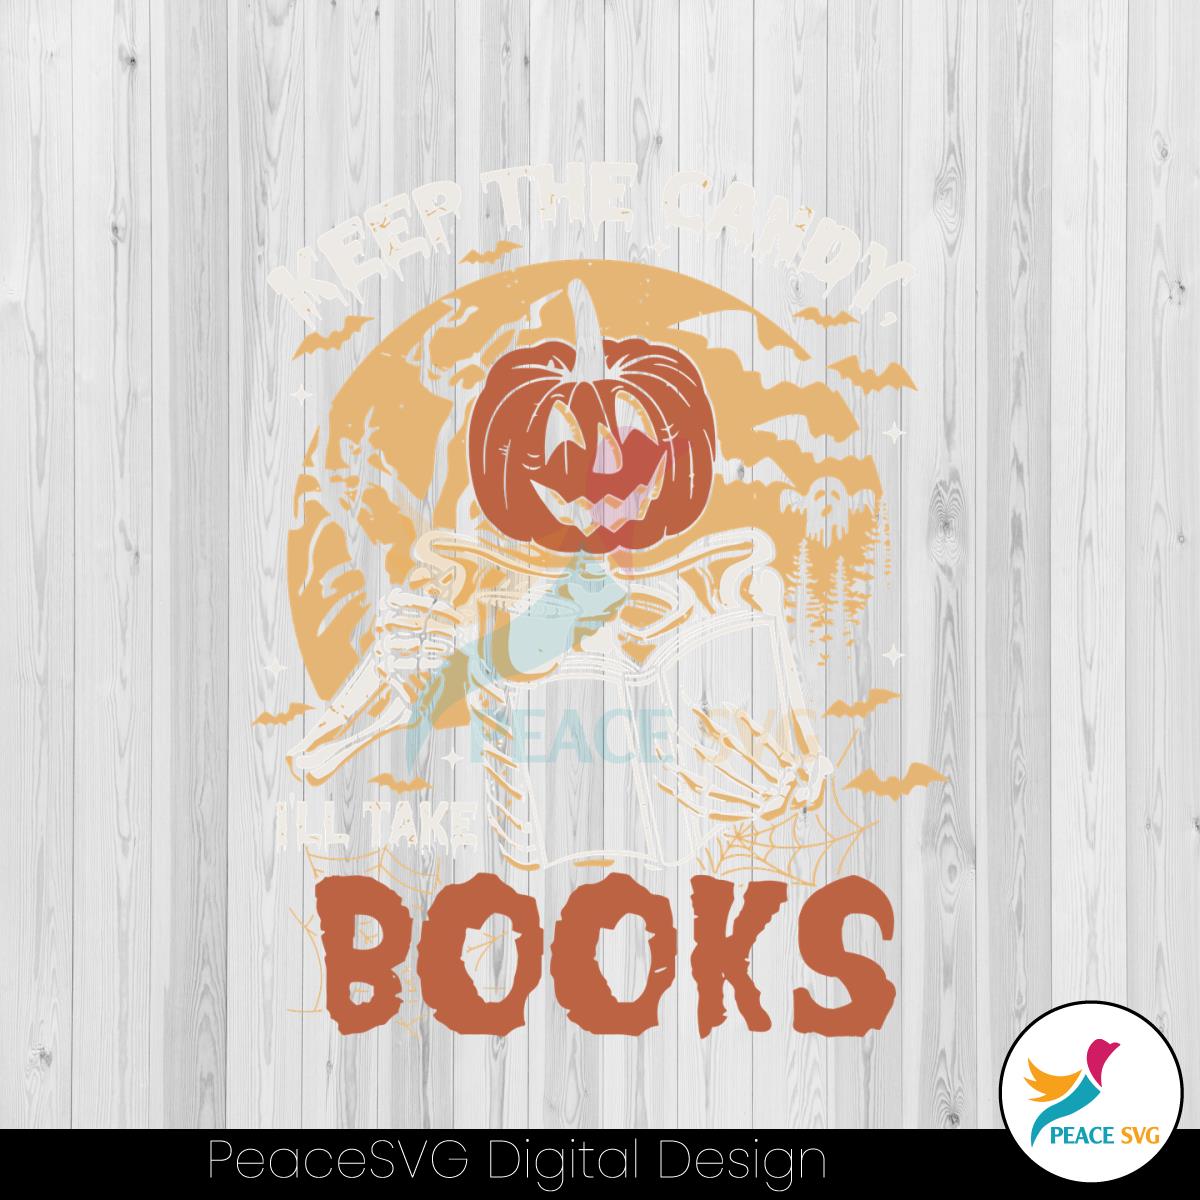 keep-the-candy-i-will-take-books-halloween-svg-digital-file